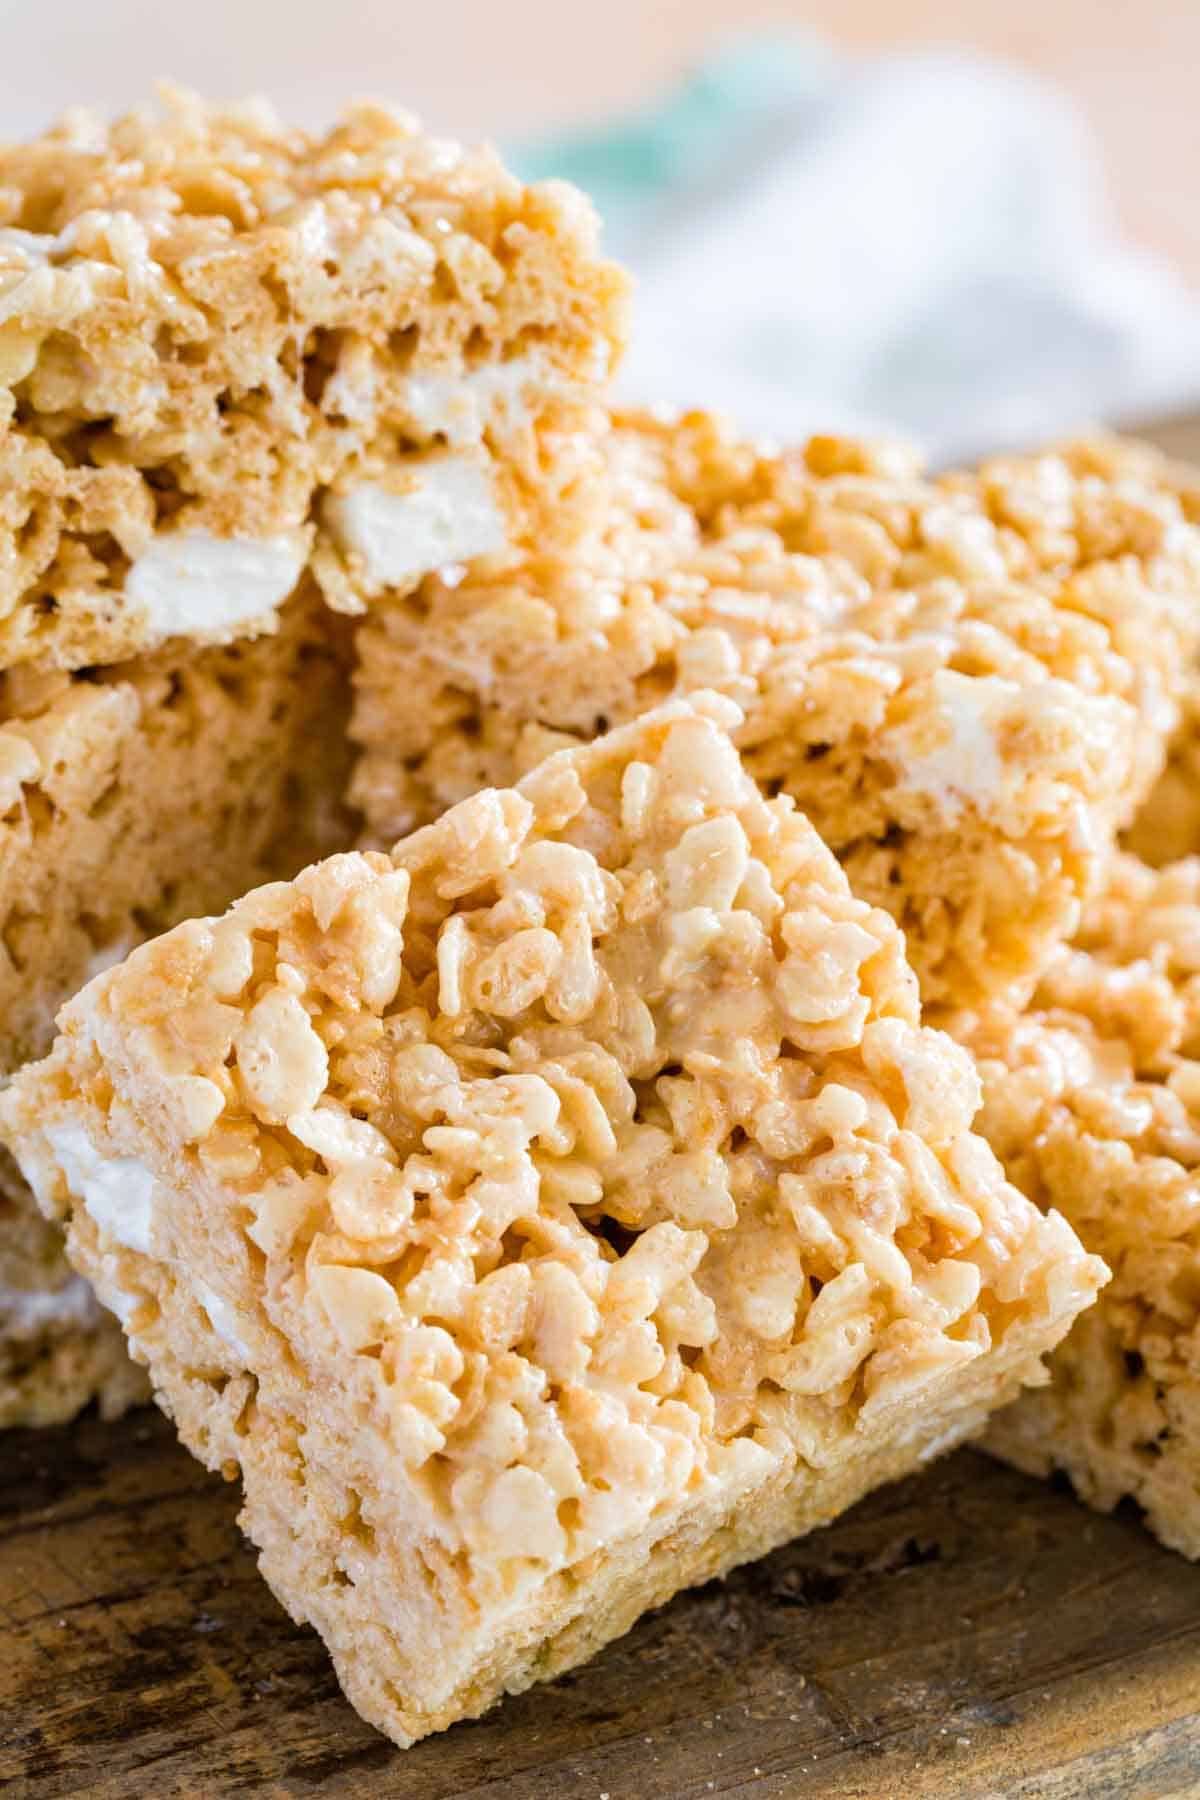 Assorted gluten-free rice krispies treats piled on a wooden board.